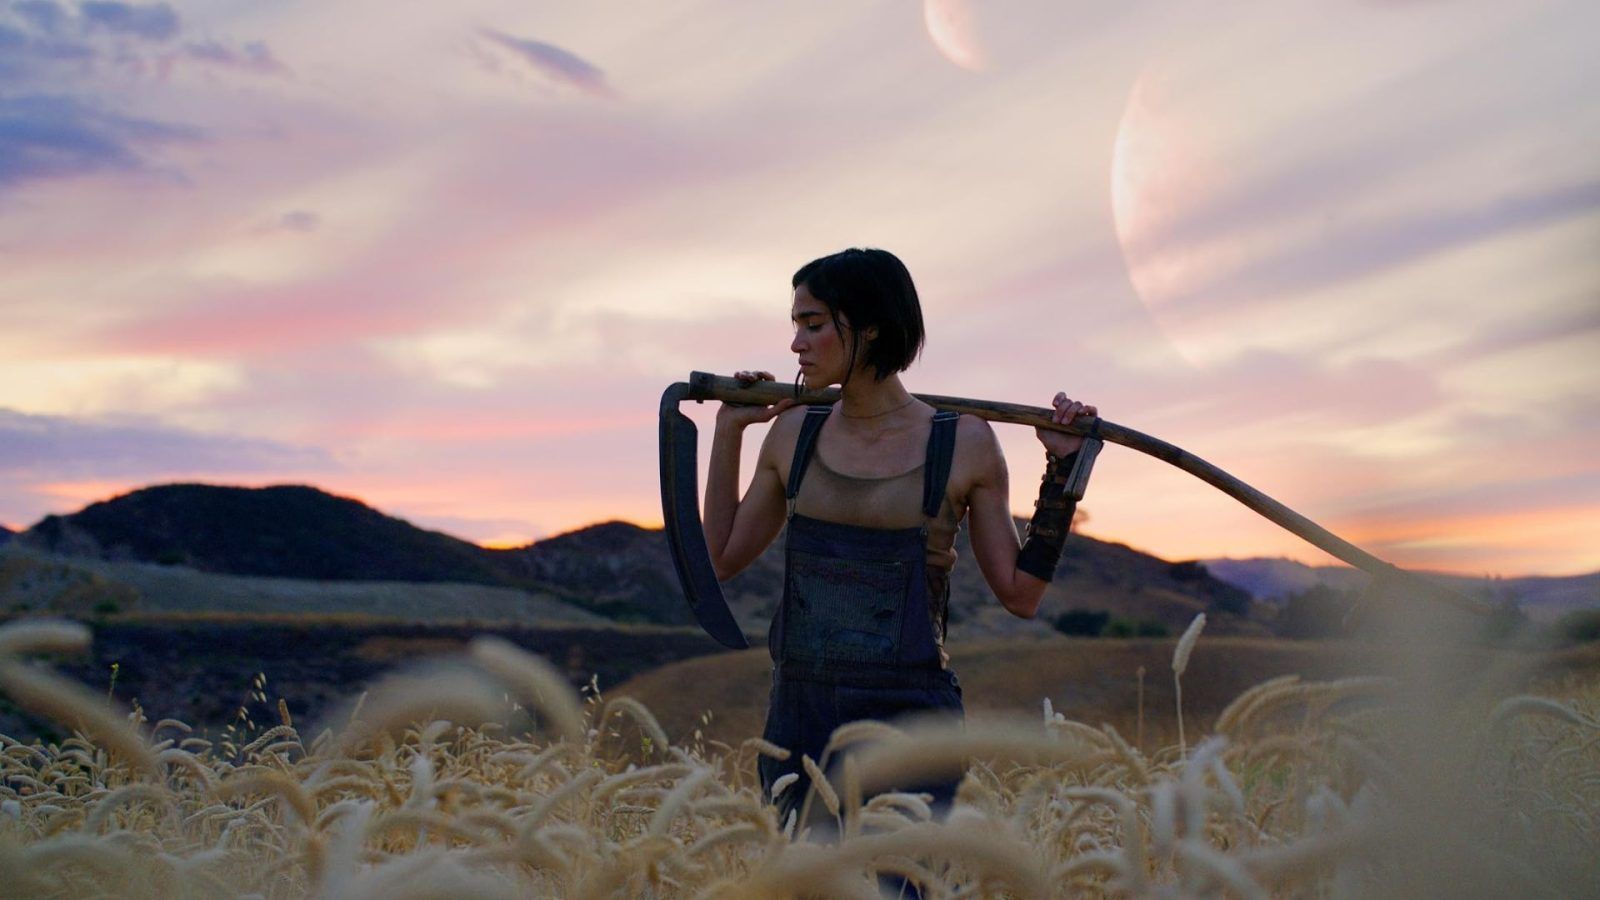 Rebel Moon': Everything We Know, Including Release Date, Cast, Sequel